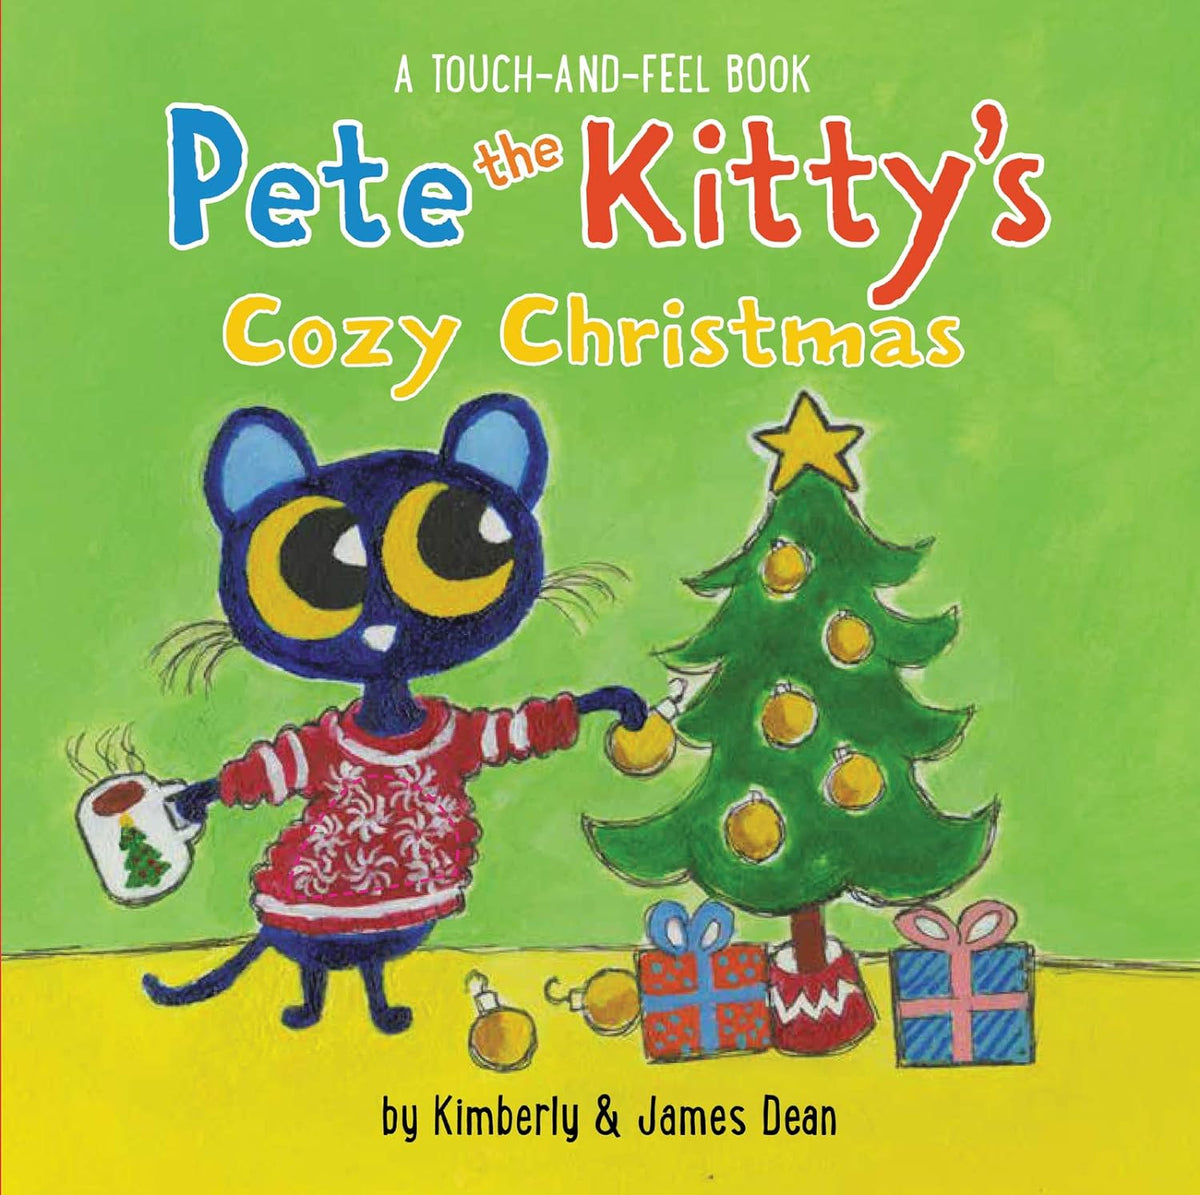 Pete the Kitty’s Cozy Christmas Touch & Feel Board Book: A Christmas Holiday Book for Kids (Pete the Cat)